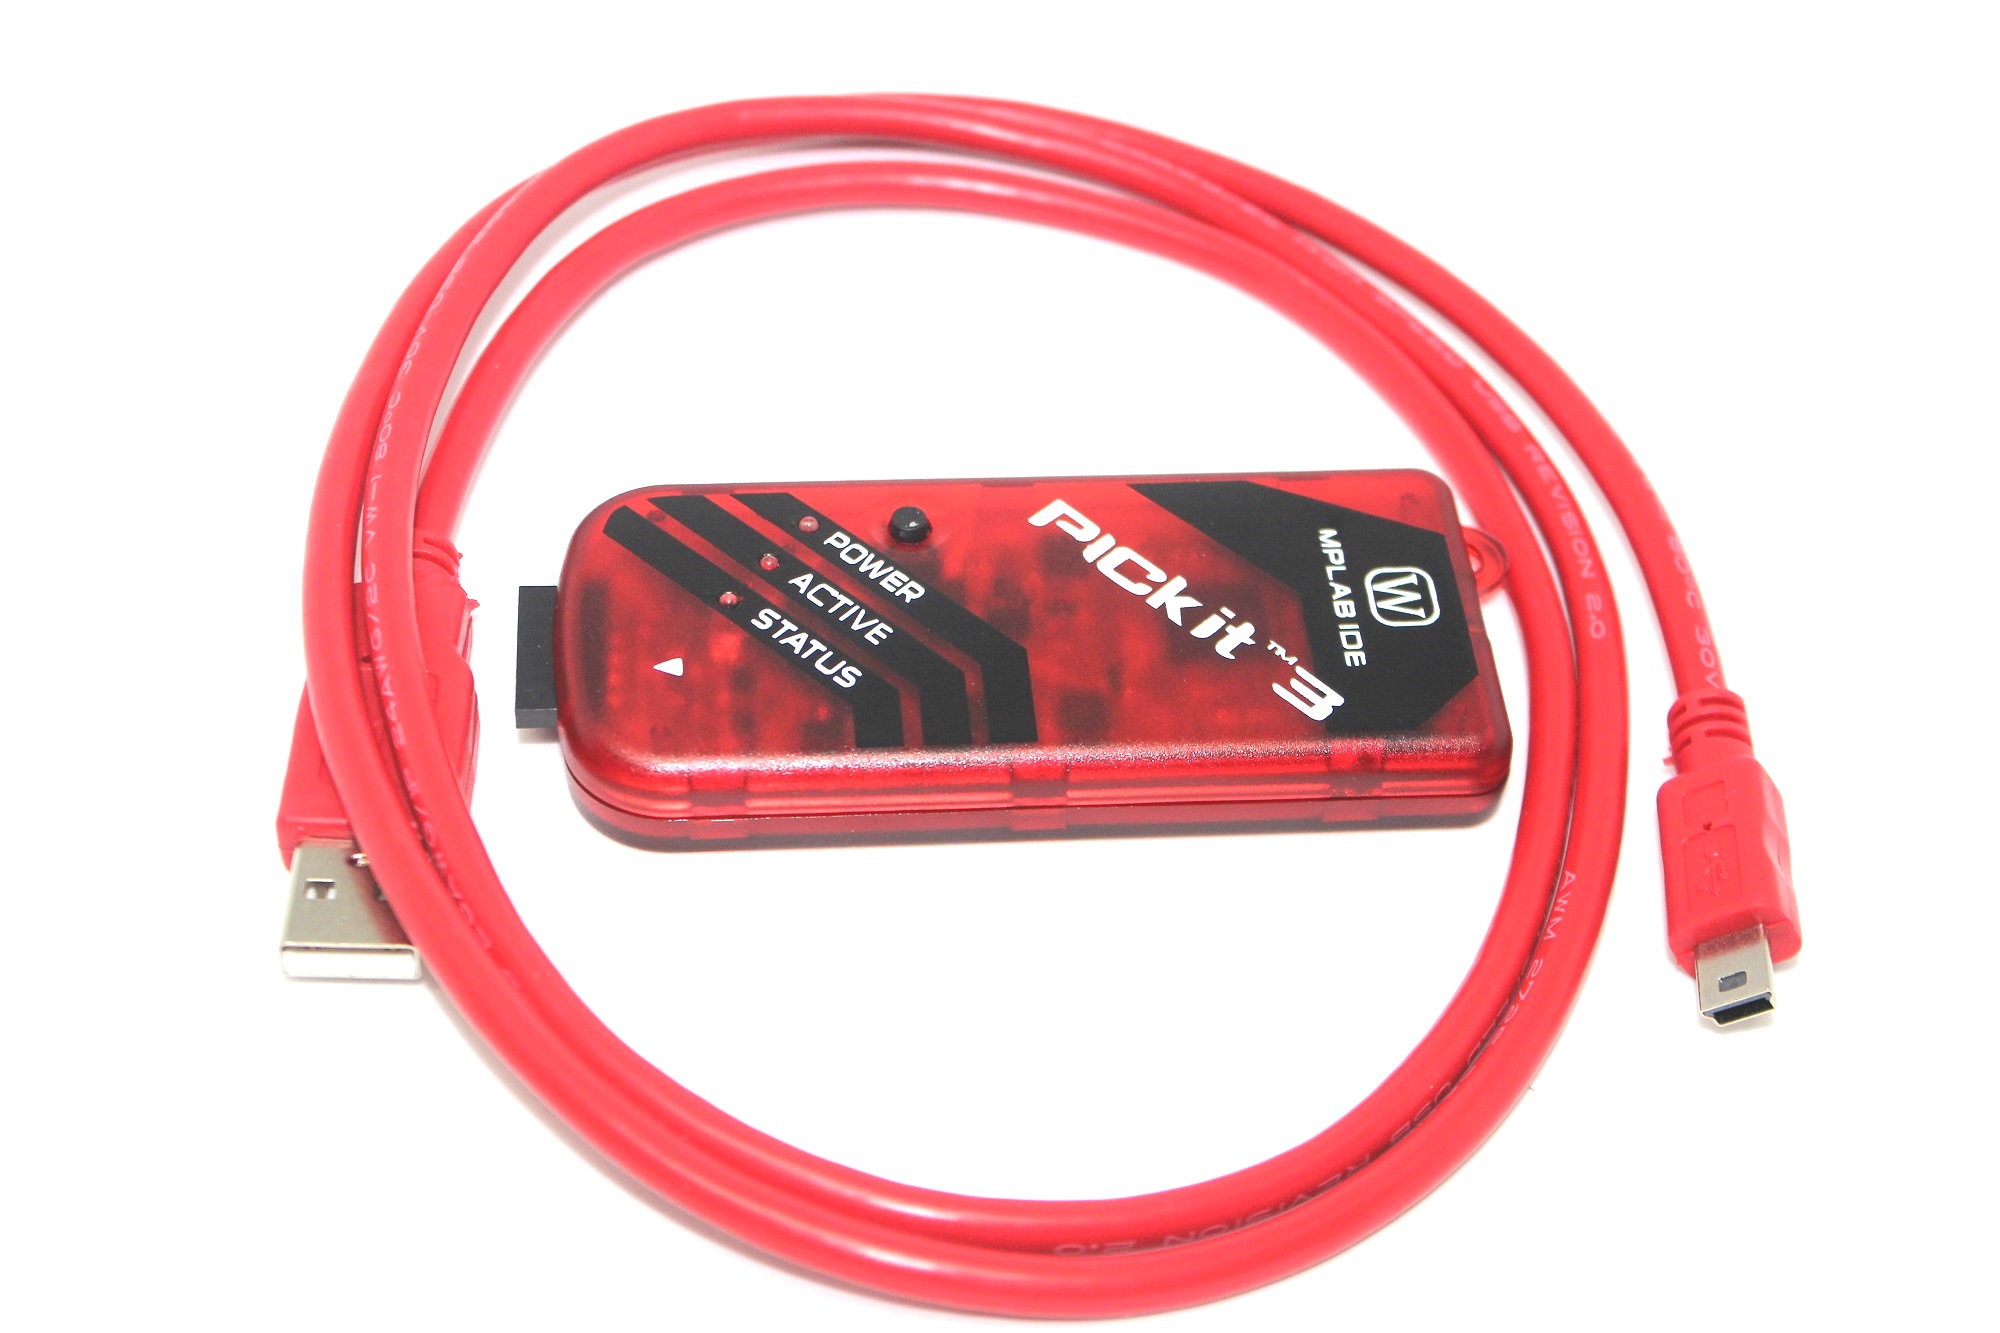 pickit 3 cable